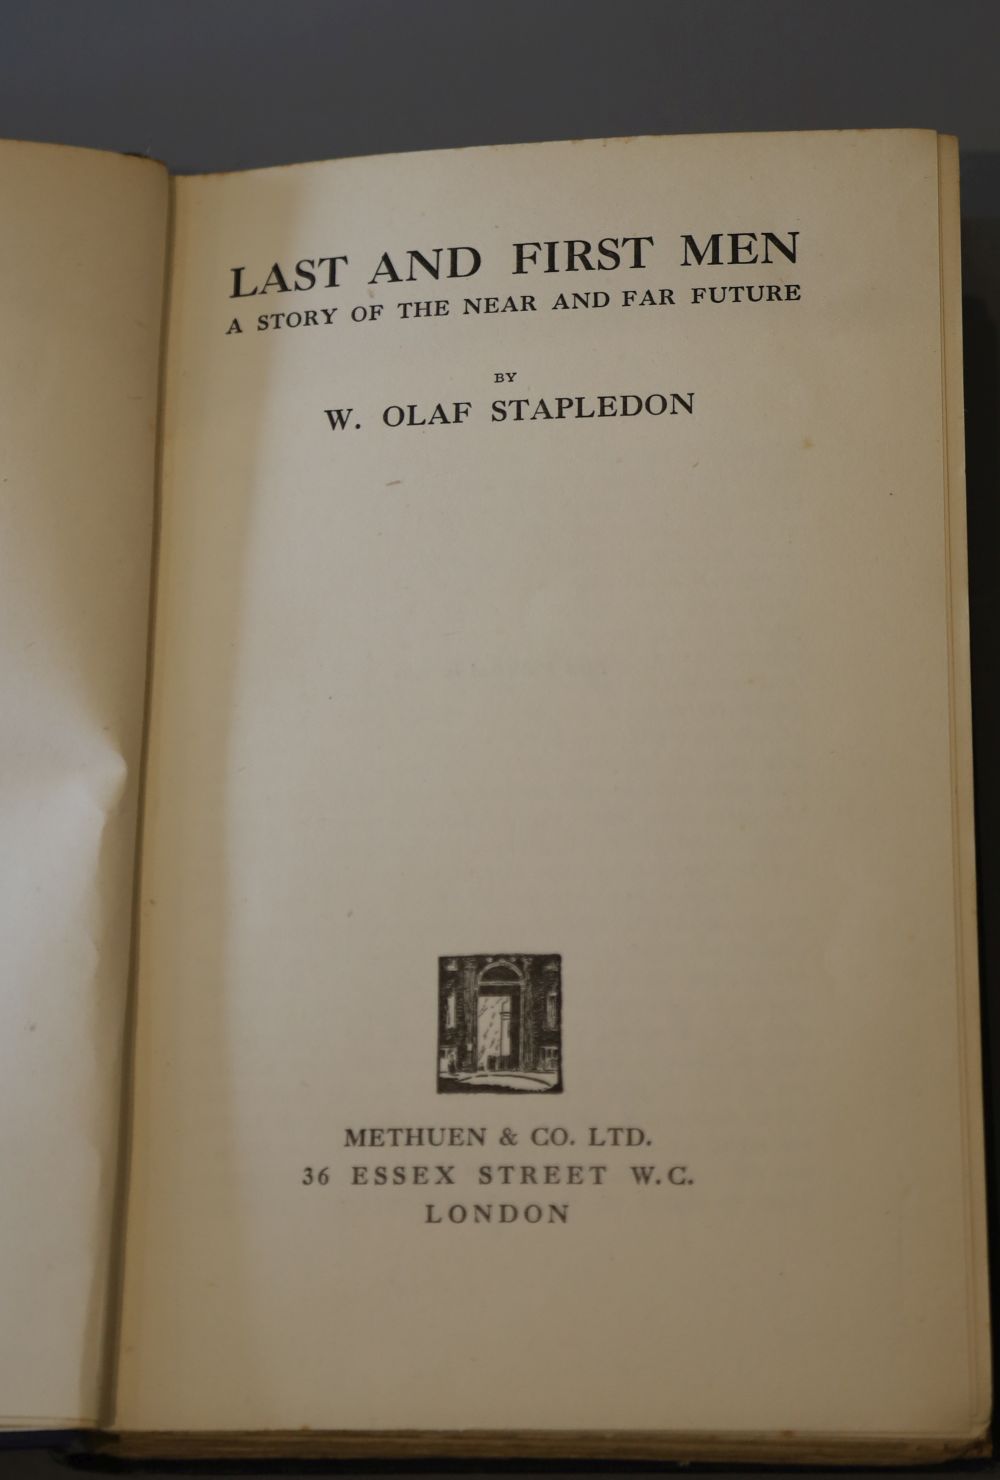 Stapledon, W Olaf - Last and First Men. A story of the near and far future, 8vo, blue cloth, gilt letter spine, Methuen & Co. Ltd, Lond